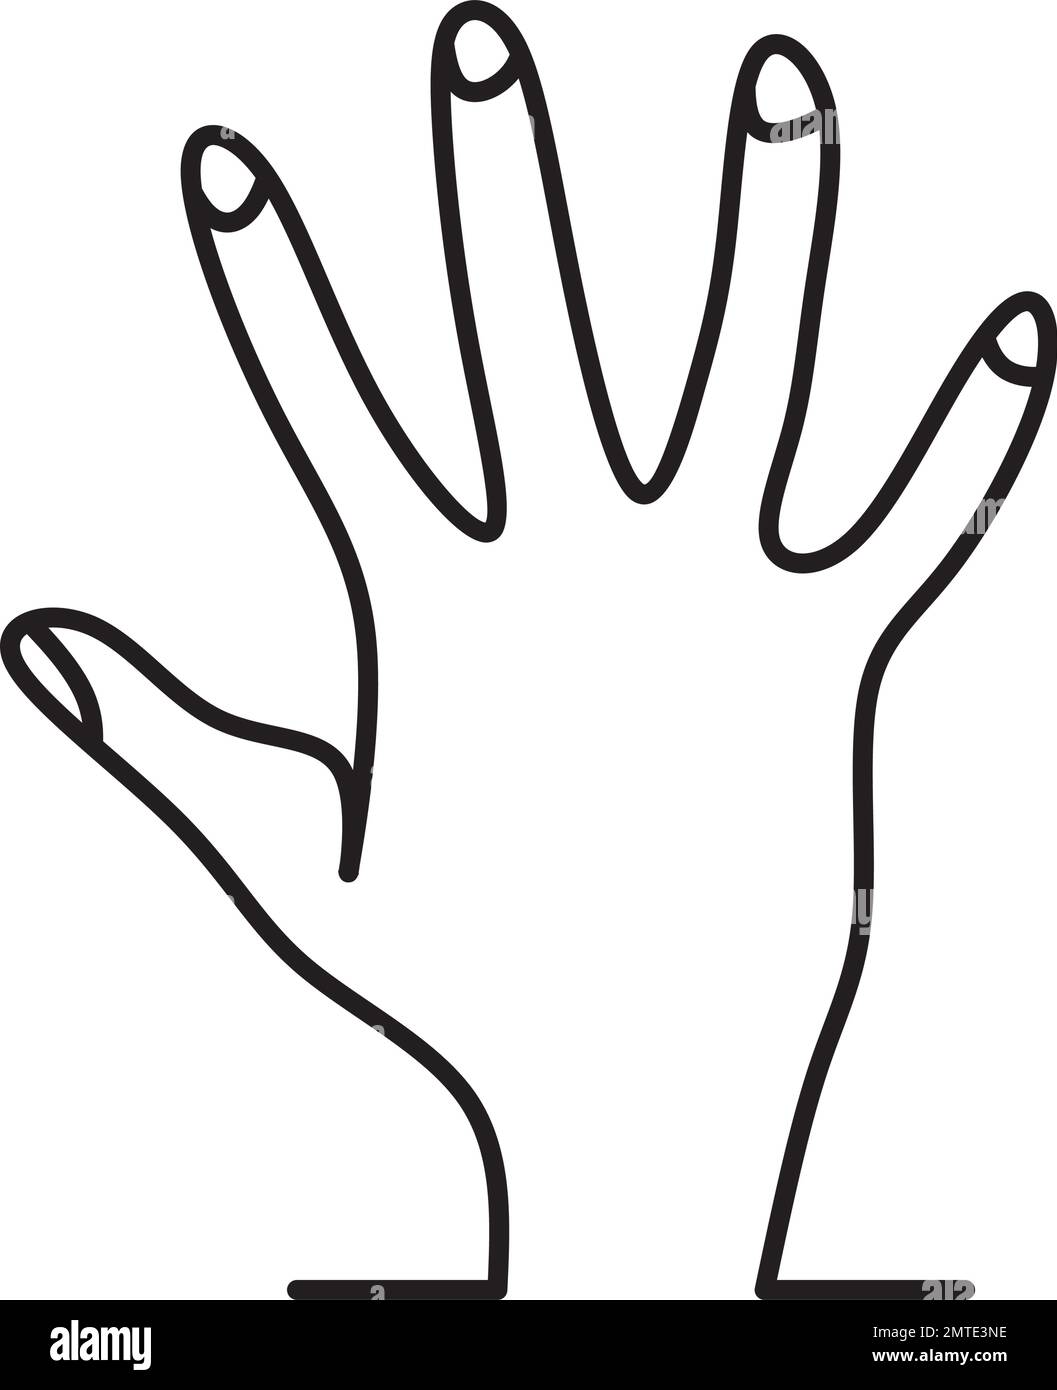 Hand showing five fingers and palm illustration, outline hand icon. Draw a Palm Line Stock Vector